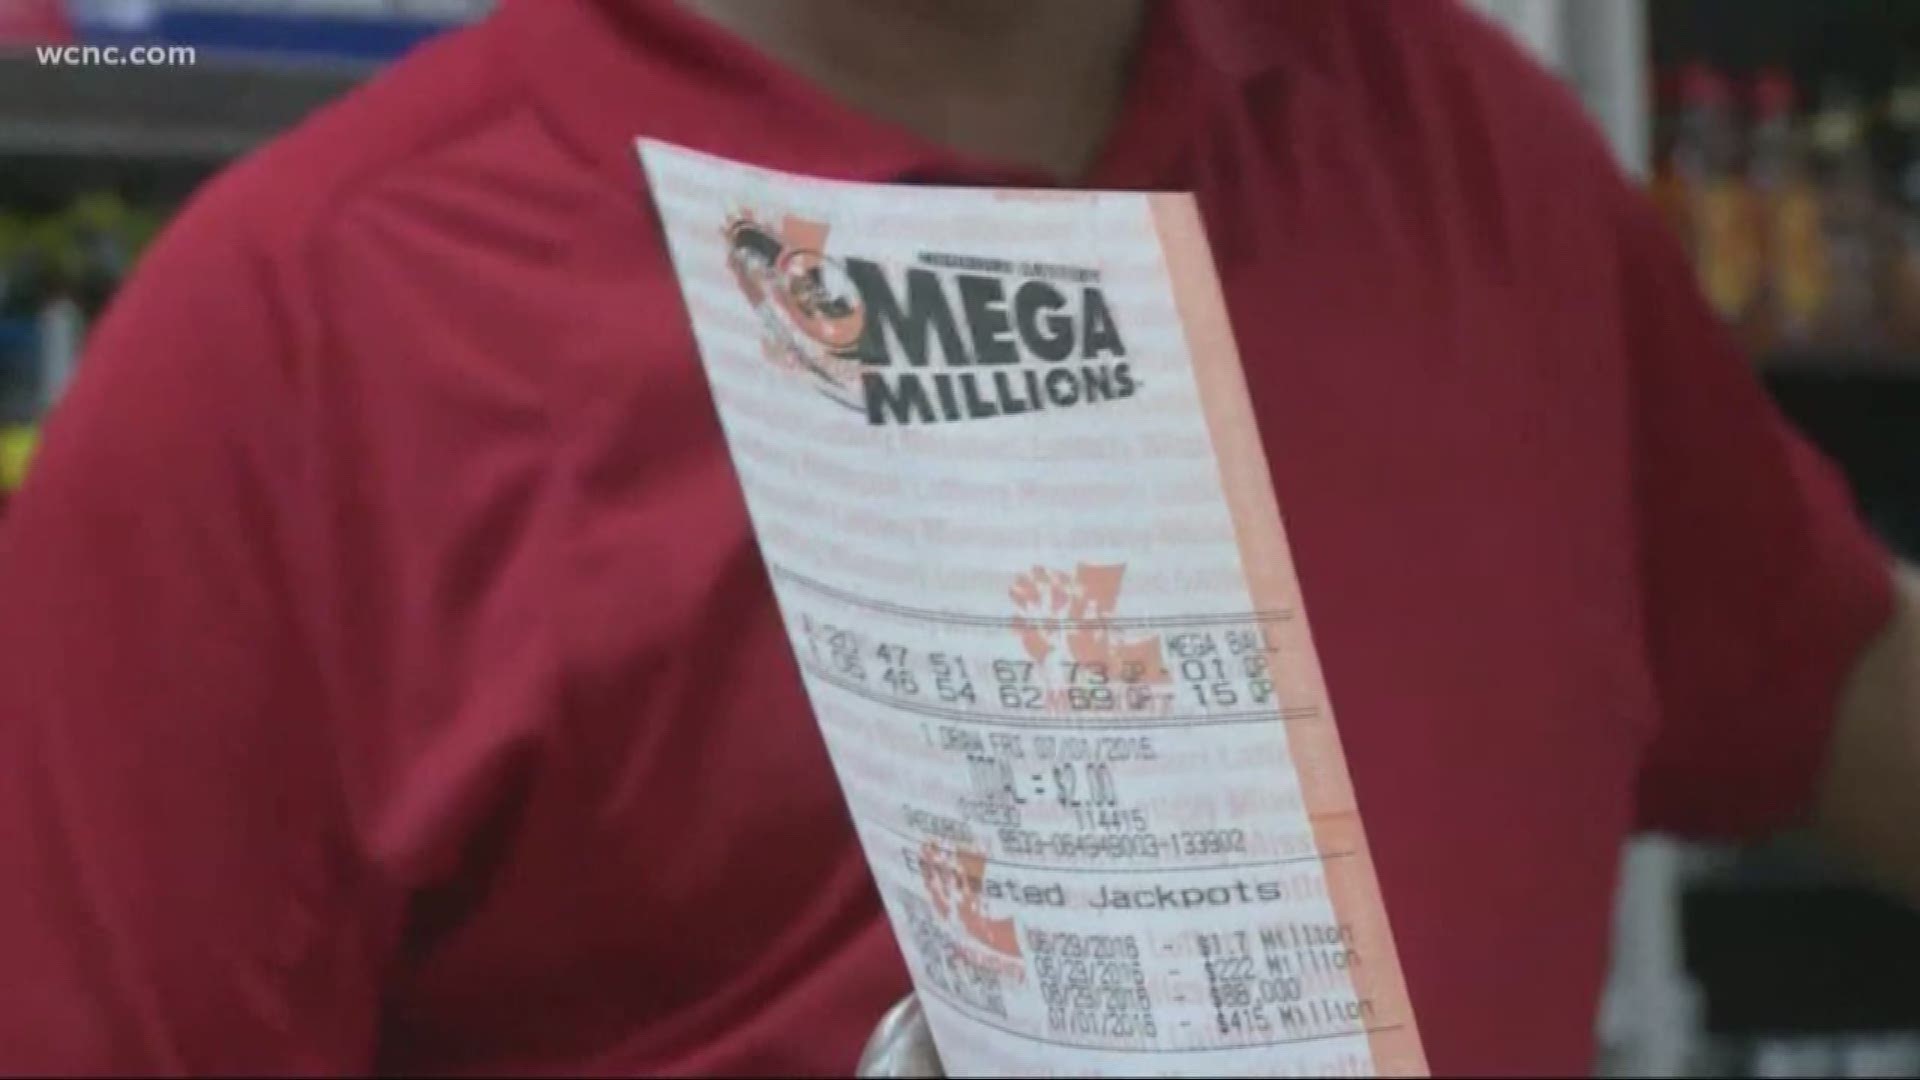 A winner has finally come forward with the $1.5 billion Mega Millions ticket sold in South Carolina.
It's the second largest lottery in U.S. history.